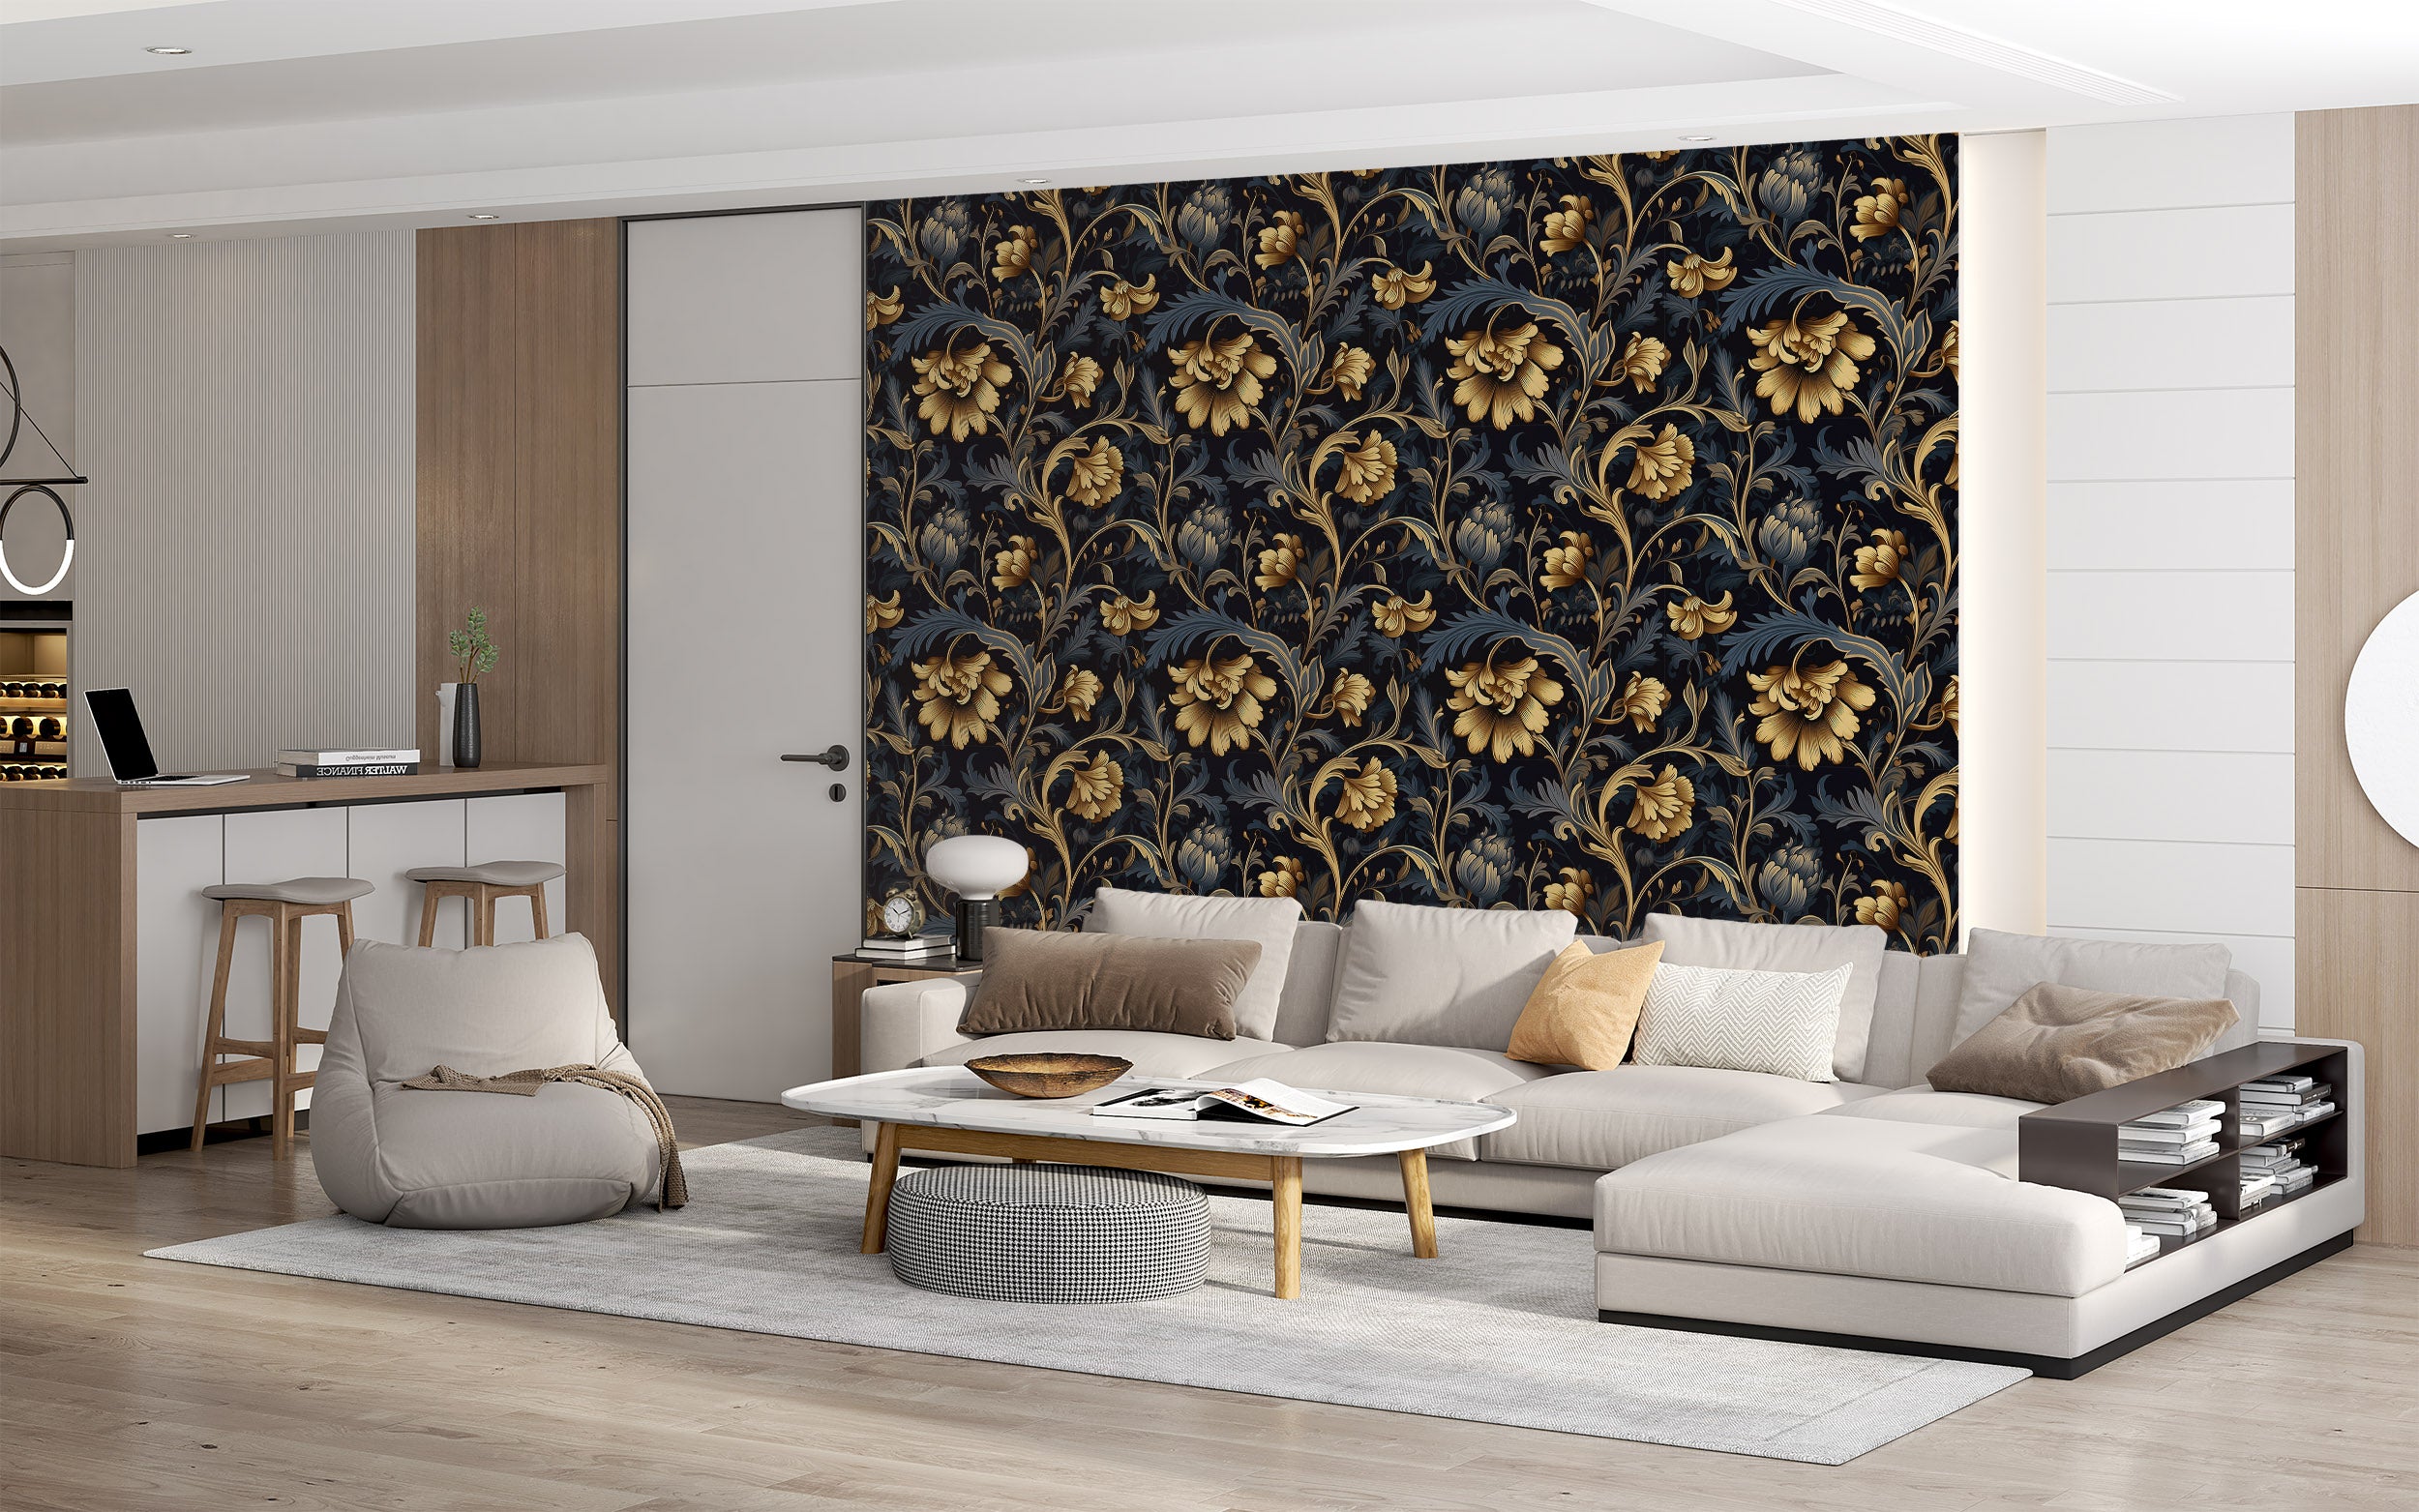 Redefine Ambiance with Luxury Botanical Wall Print